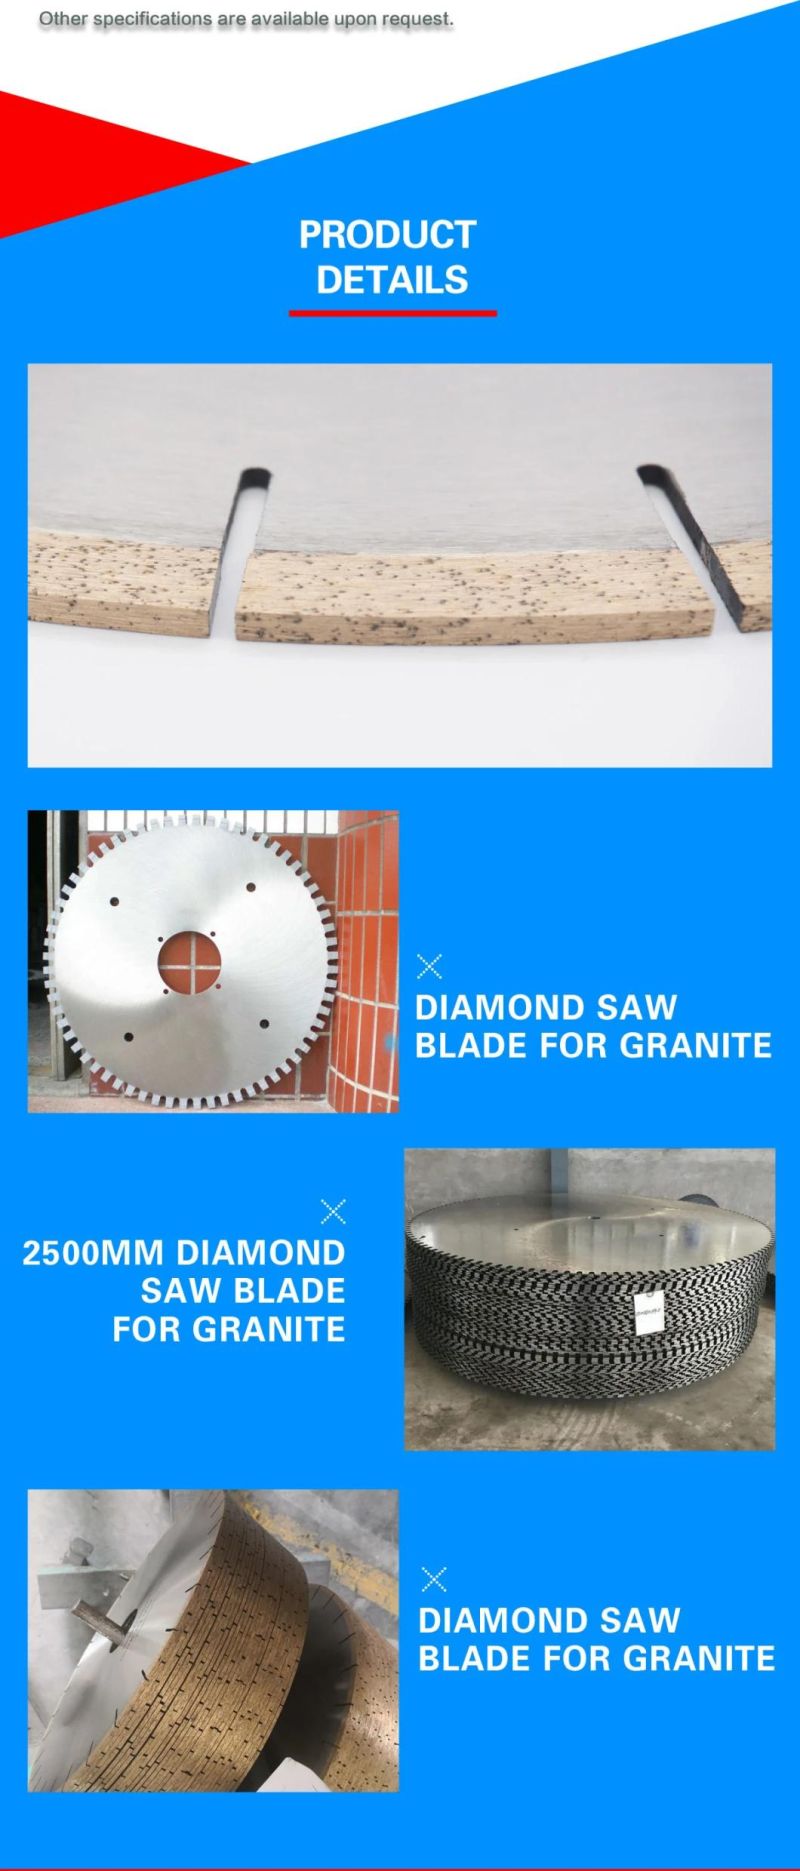 Hot Sale Diamond silent Saw Blade for Granite Cutting with Good Sharpness